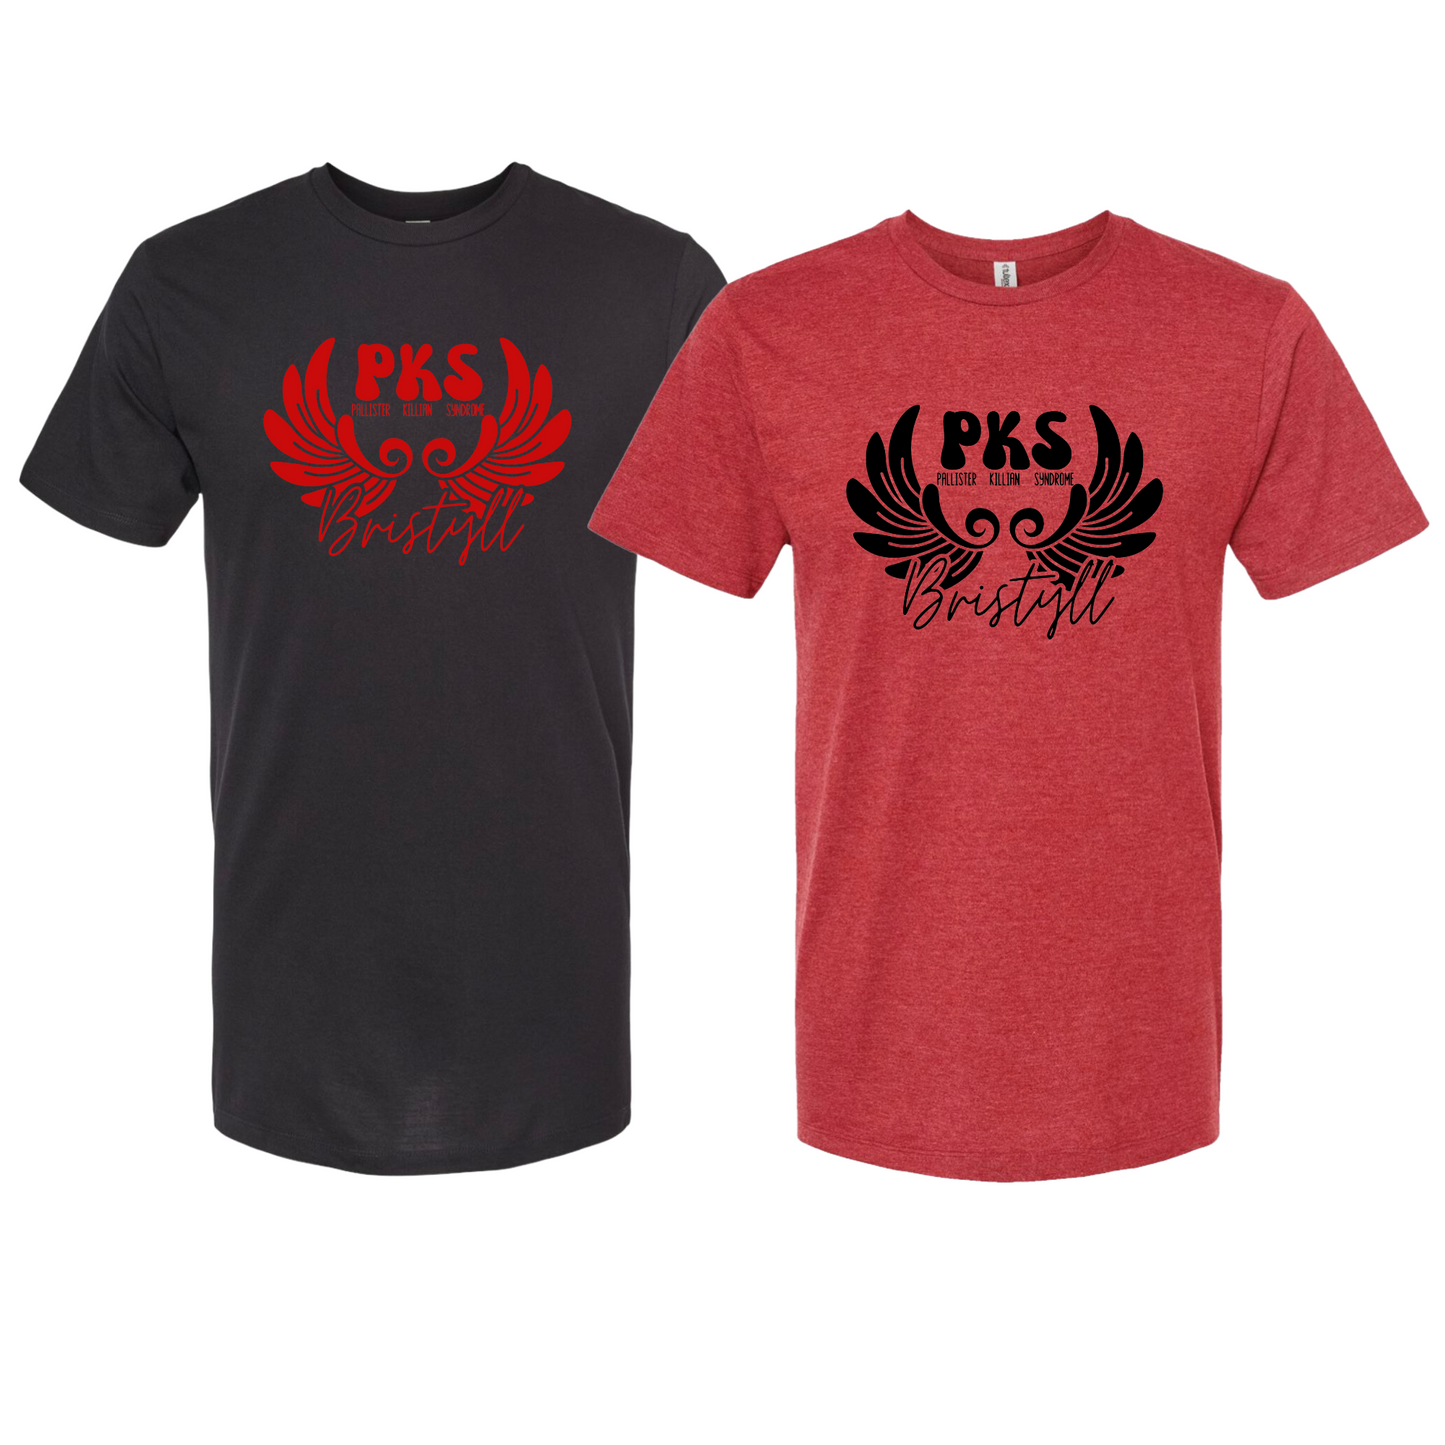 Bristyll (PKS) Support Tees in Red and Black